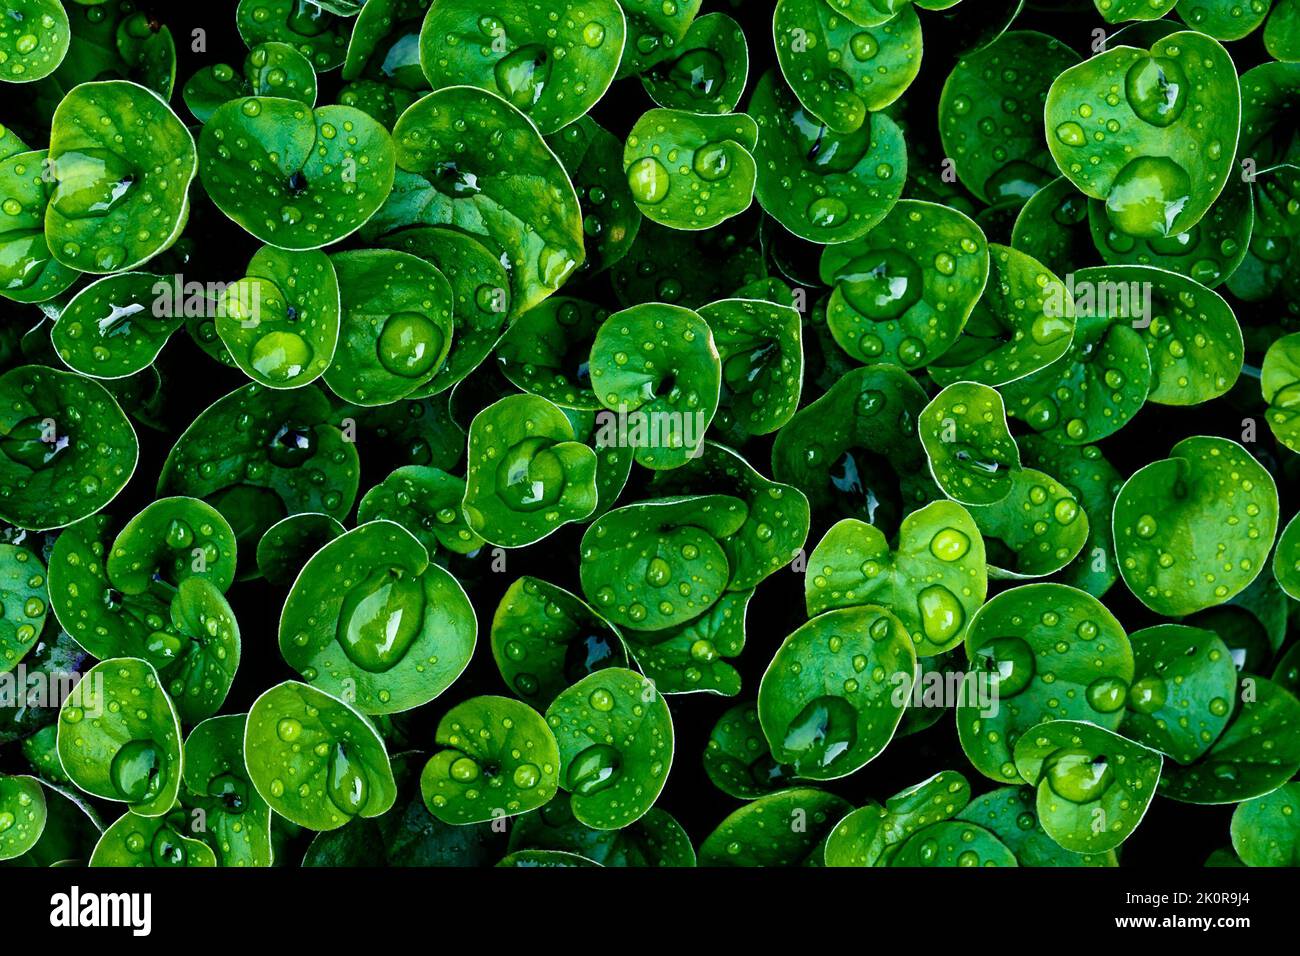 Floral background with green leaves covered with water drops. Macro photography. Stock Photo